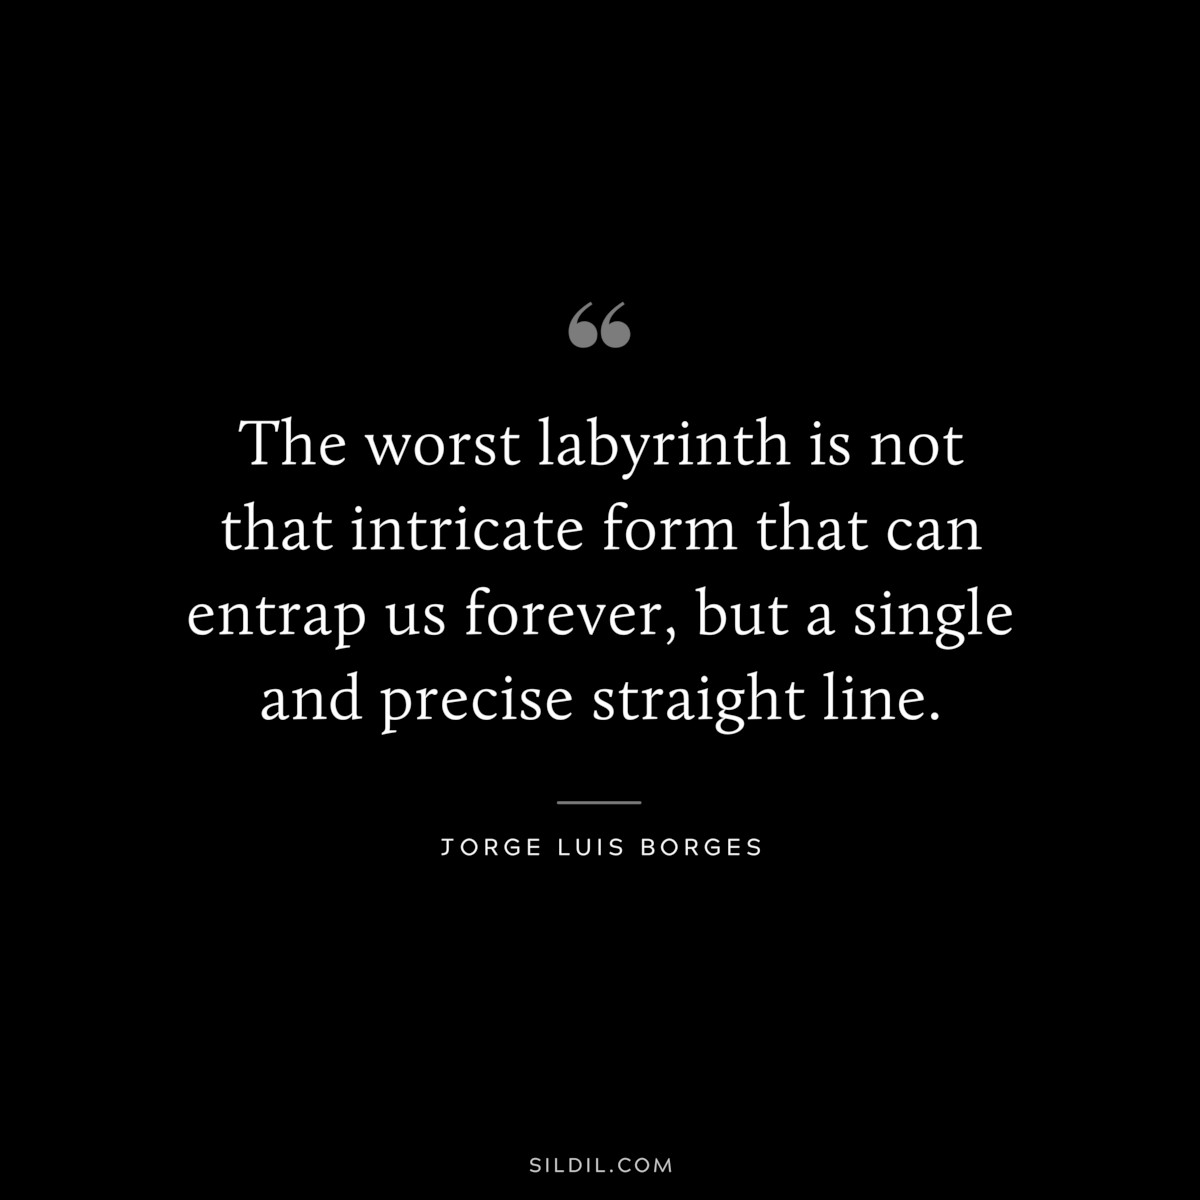 The worst labyrinth is not that intricate form that can entrap us forever, but a single and precise straight line. ― Jorge Luis Borges